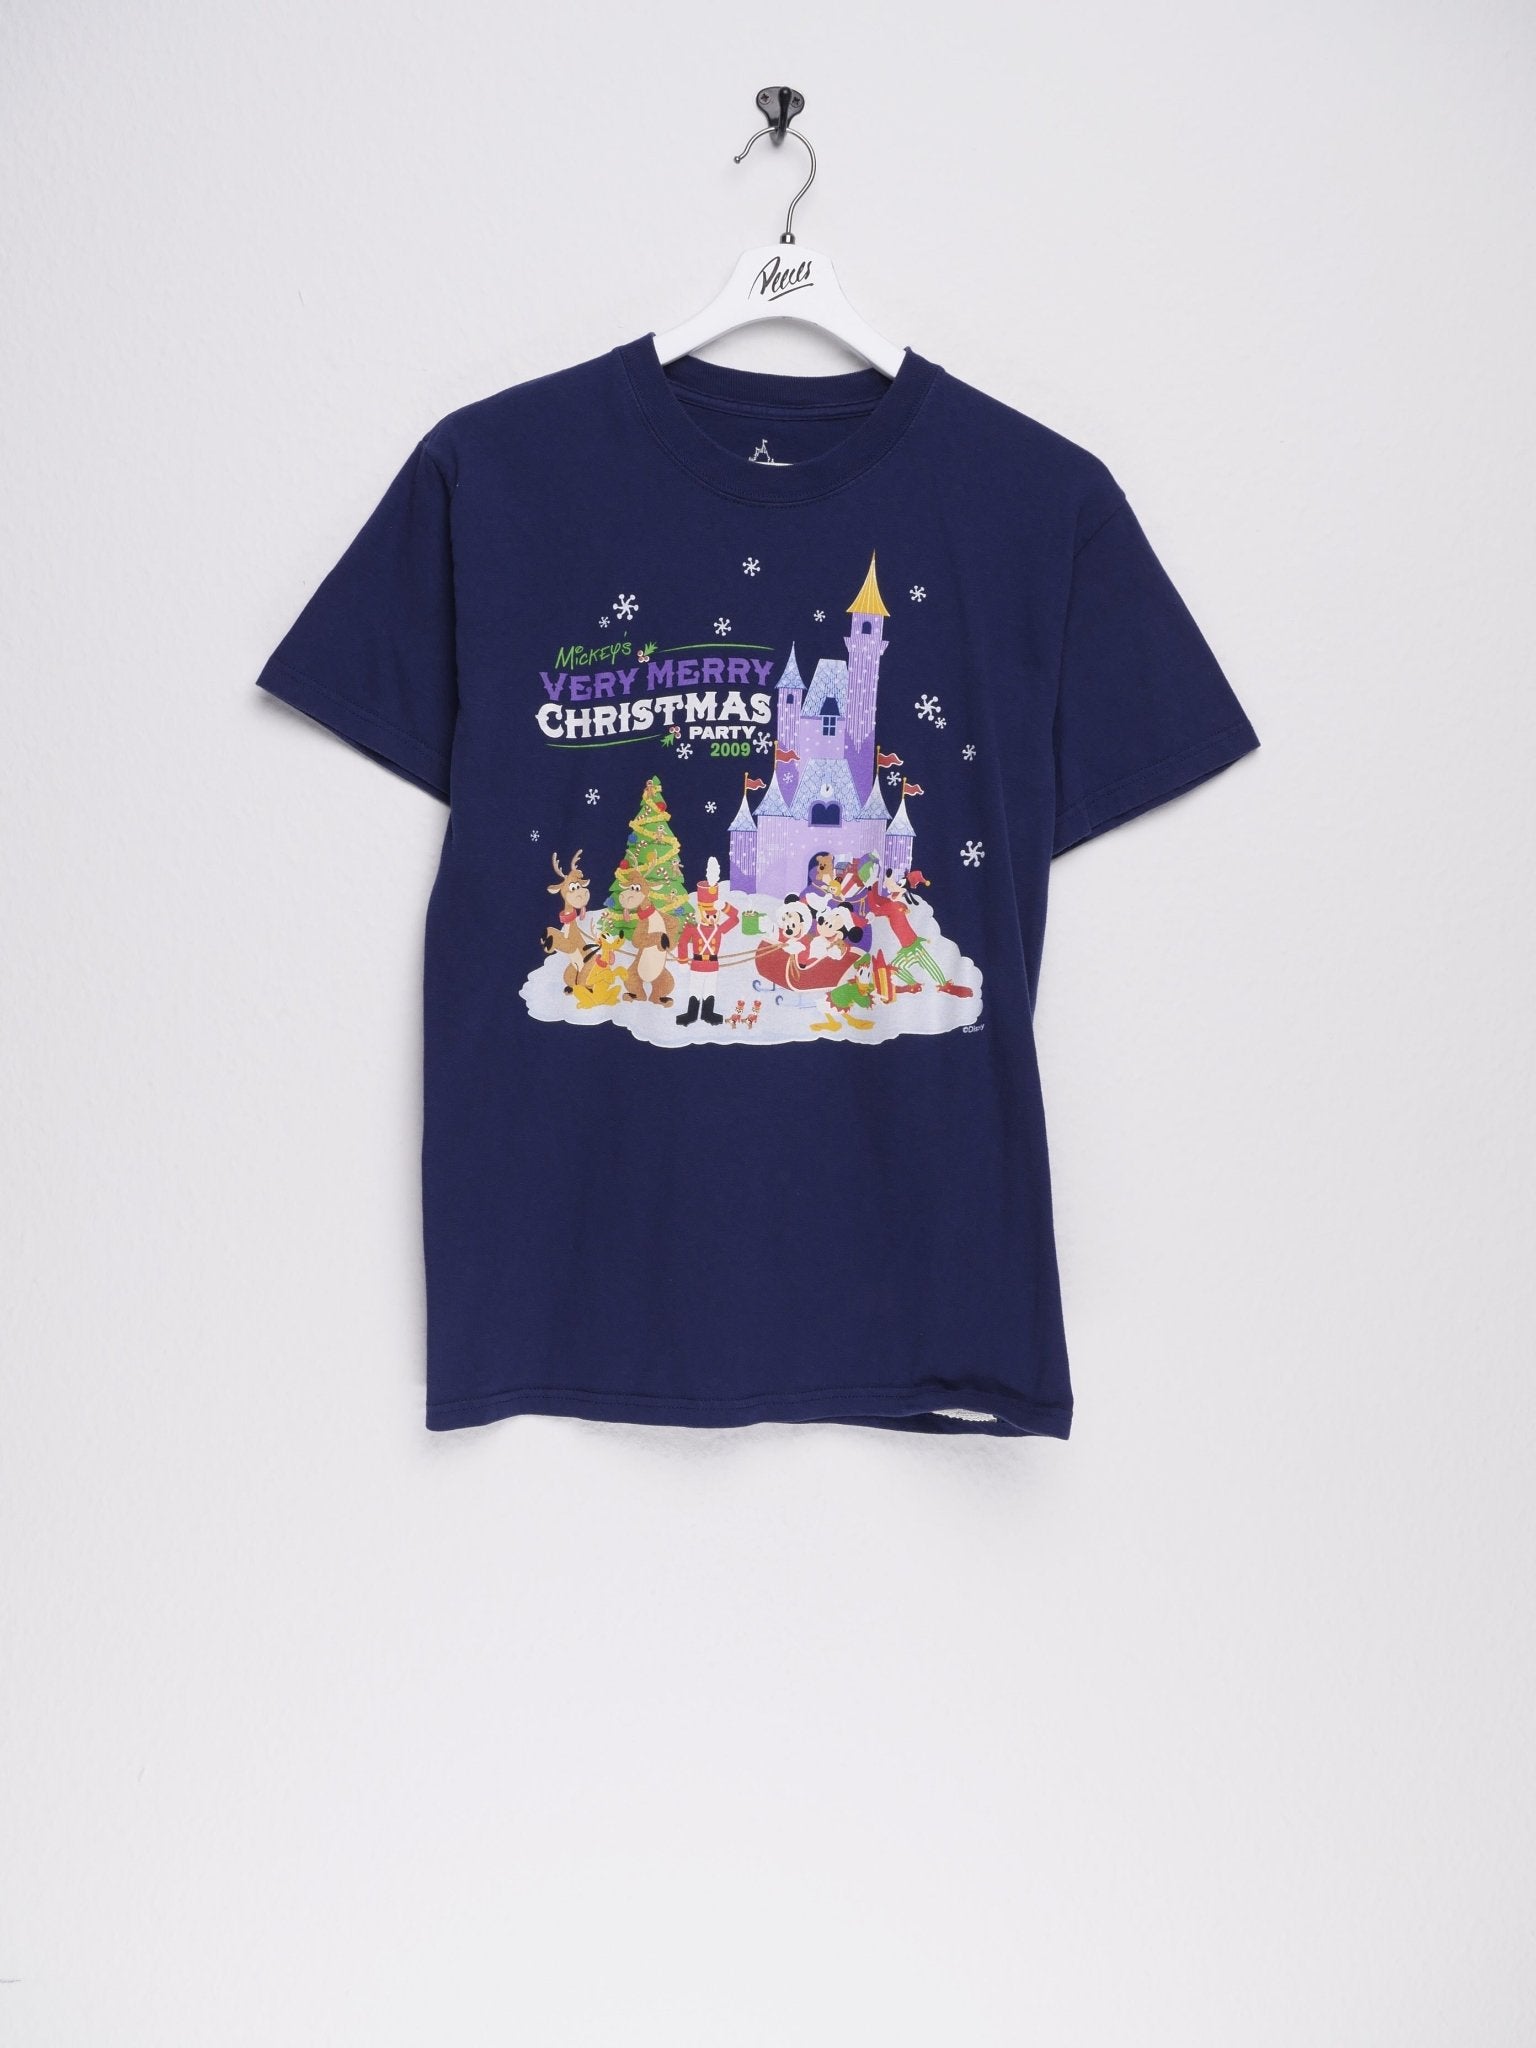 Disney Mickey's Very Merry Christmas Party 2009 printed Graphic Shirt - Peeces